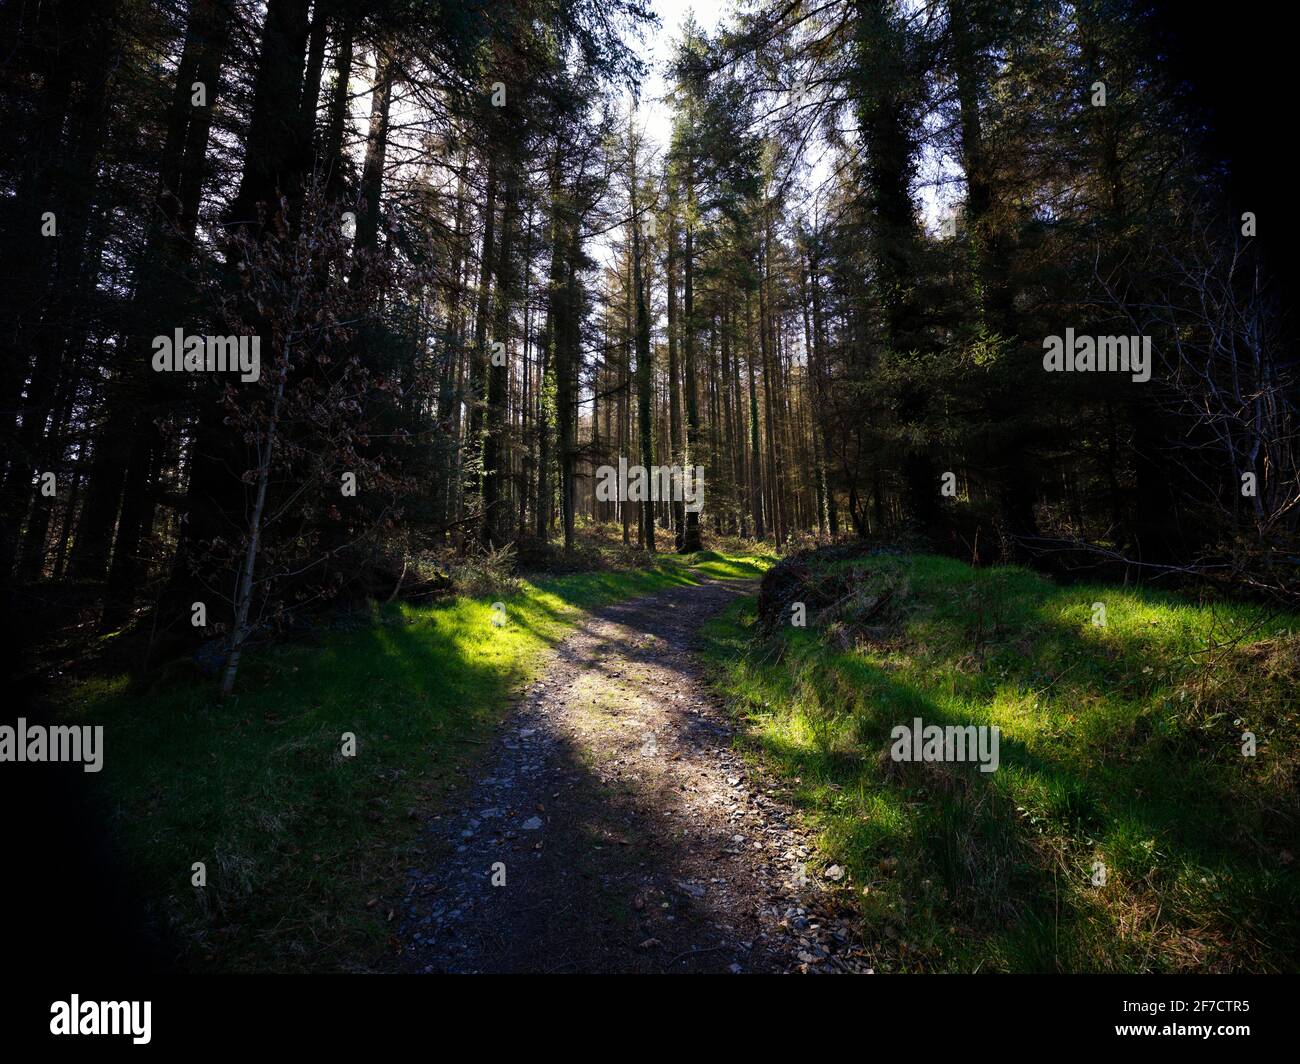 Unmade road leading away through a pine wooded area Stock Photo